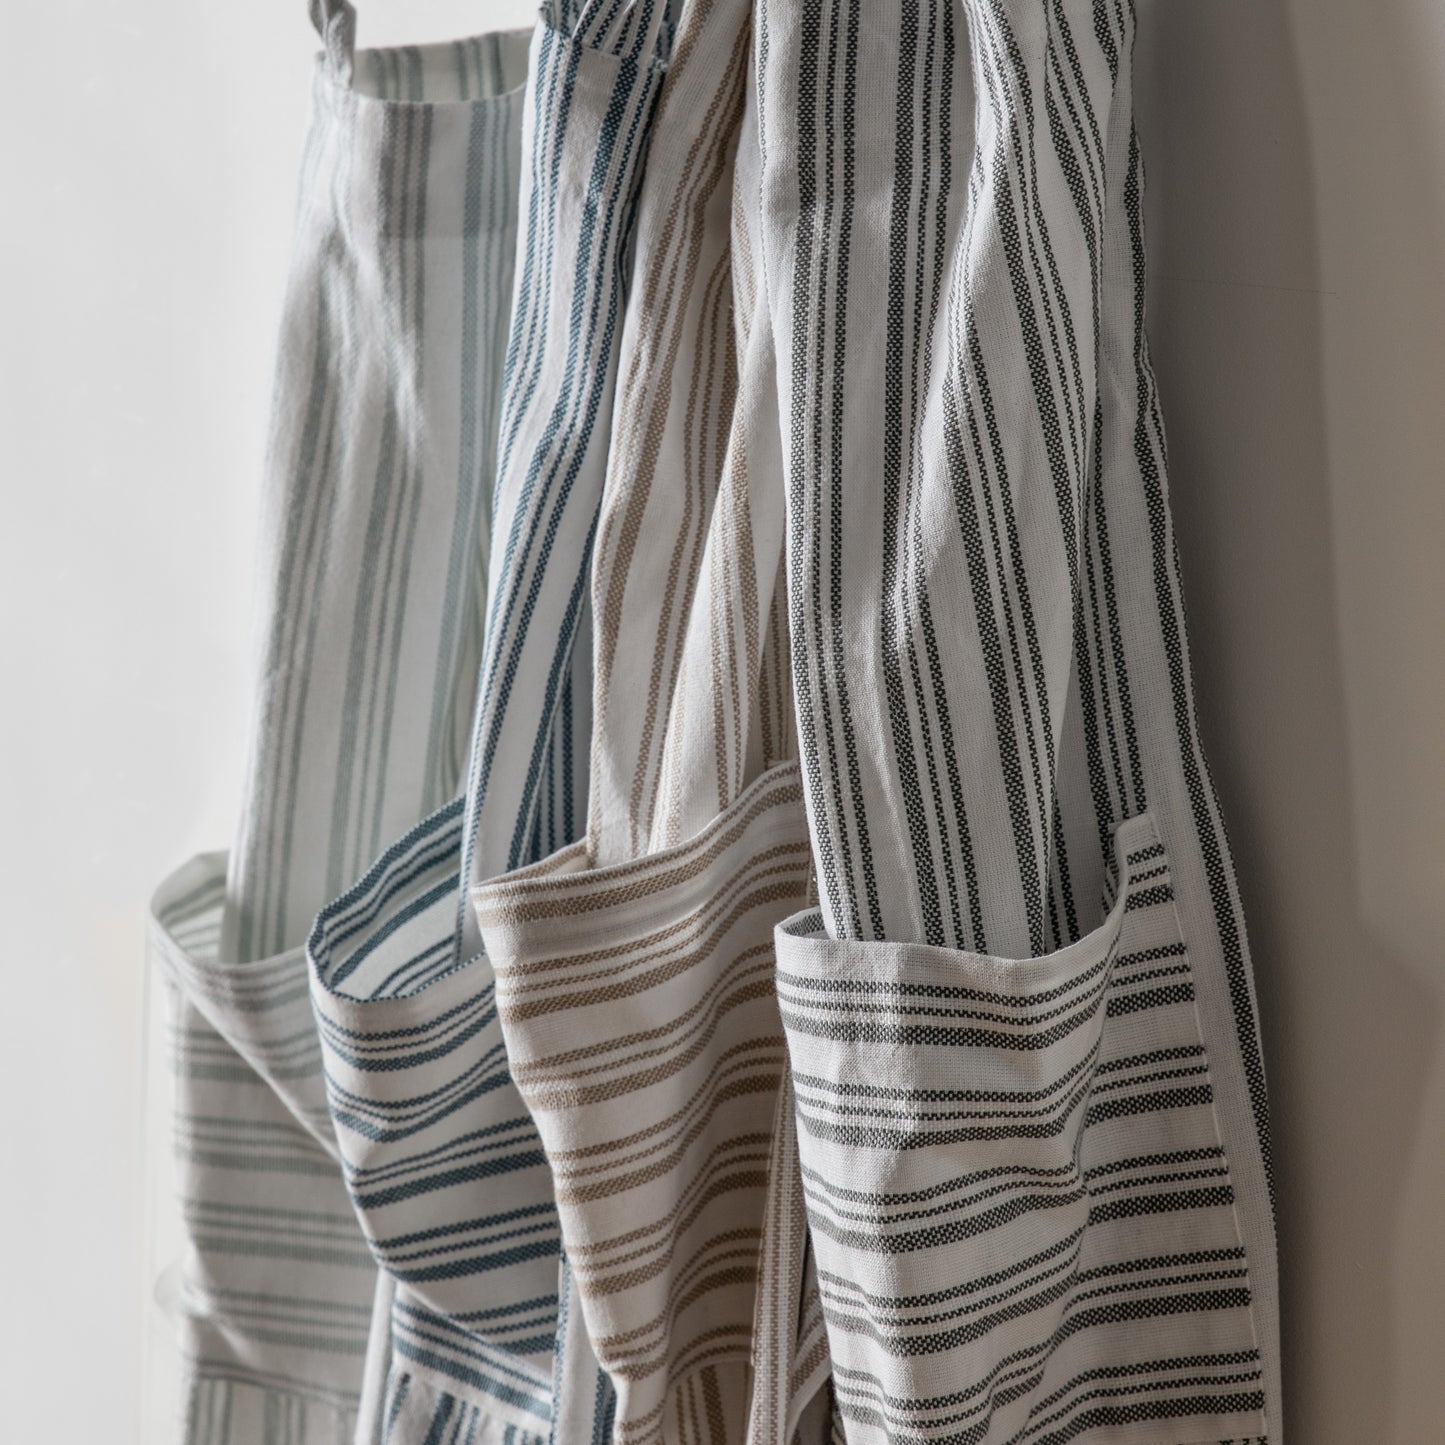 Load image into Gallery viewer, Three Organic Cotton Aprons hanging on a wall as part of the interior decor by Kikiathome.co.uk.
